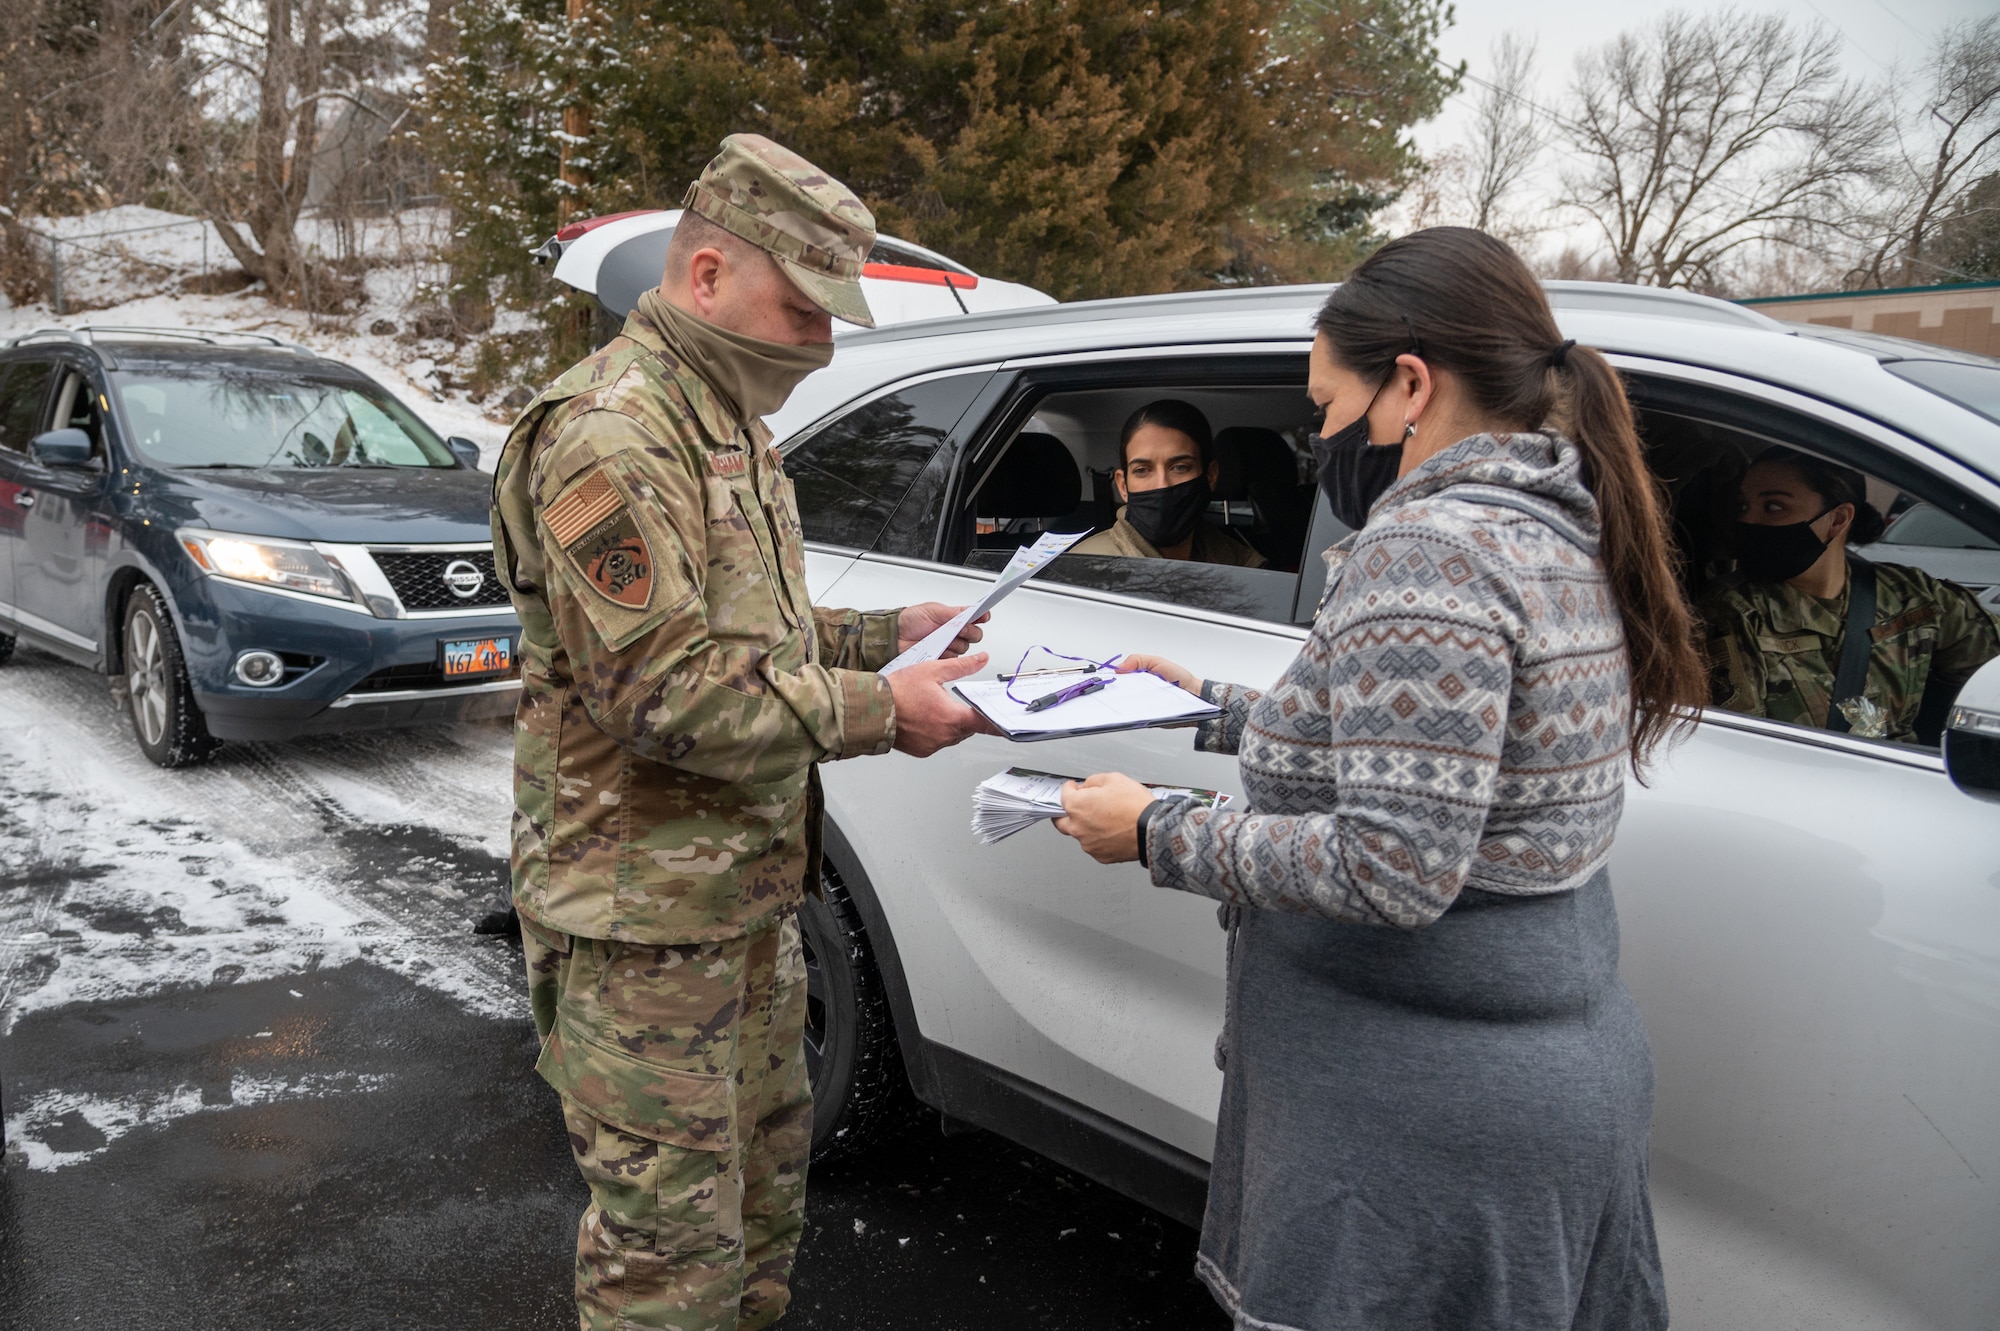 Master Sgt. Mikael Cunningham, 419th Fighter Wing, grabs a volunteer sign-up sheet from Amy Wicks, Lead Foster/Adoptive Consultant at Utah Foster Care Foundation in Ogden, Utah, Dec. 17, 2020, as part of a volunteer effort called Santa Brigade.